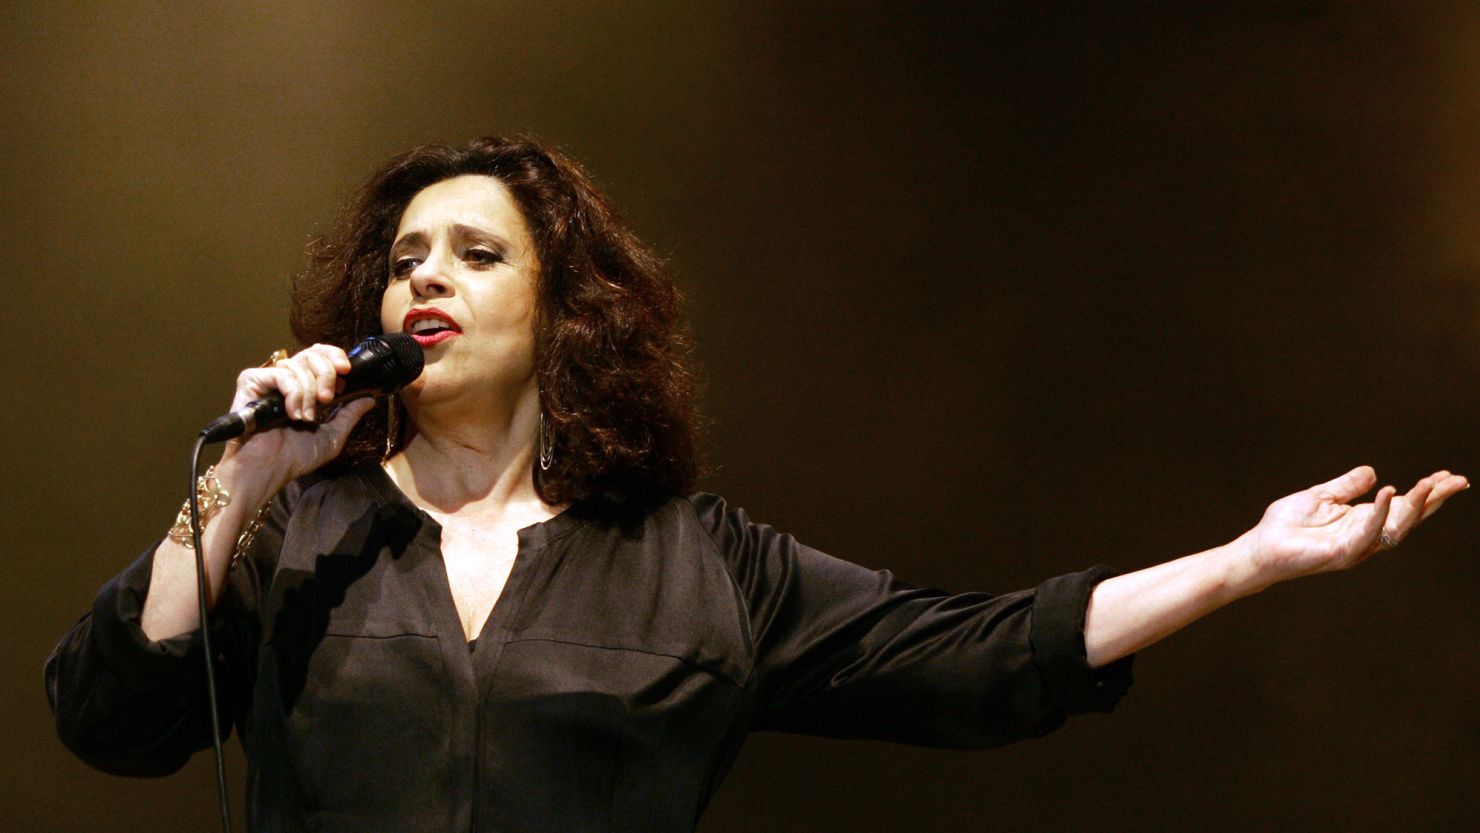 Gal Costa was born in the city of Salvador, in the state of Bahia, on September 26, 1945, and is considered as one of the most distinctive voices in Brazil's Tropicalia movement.